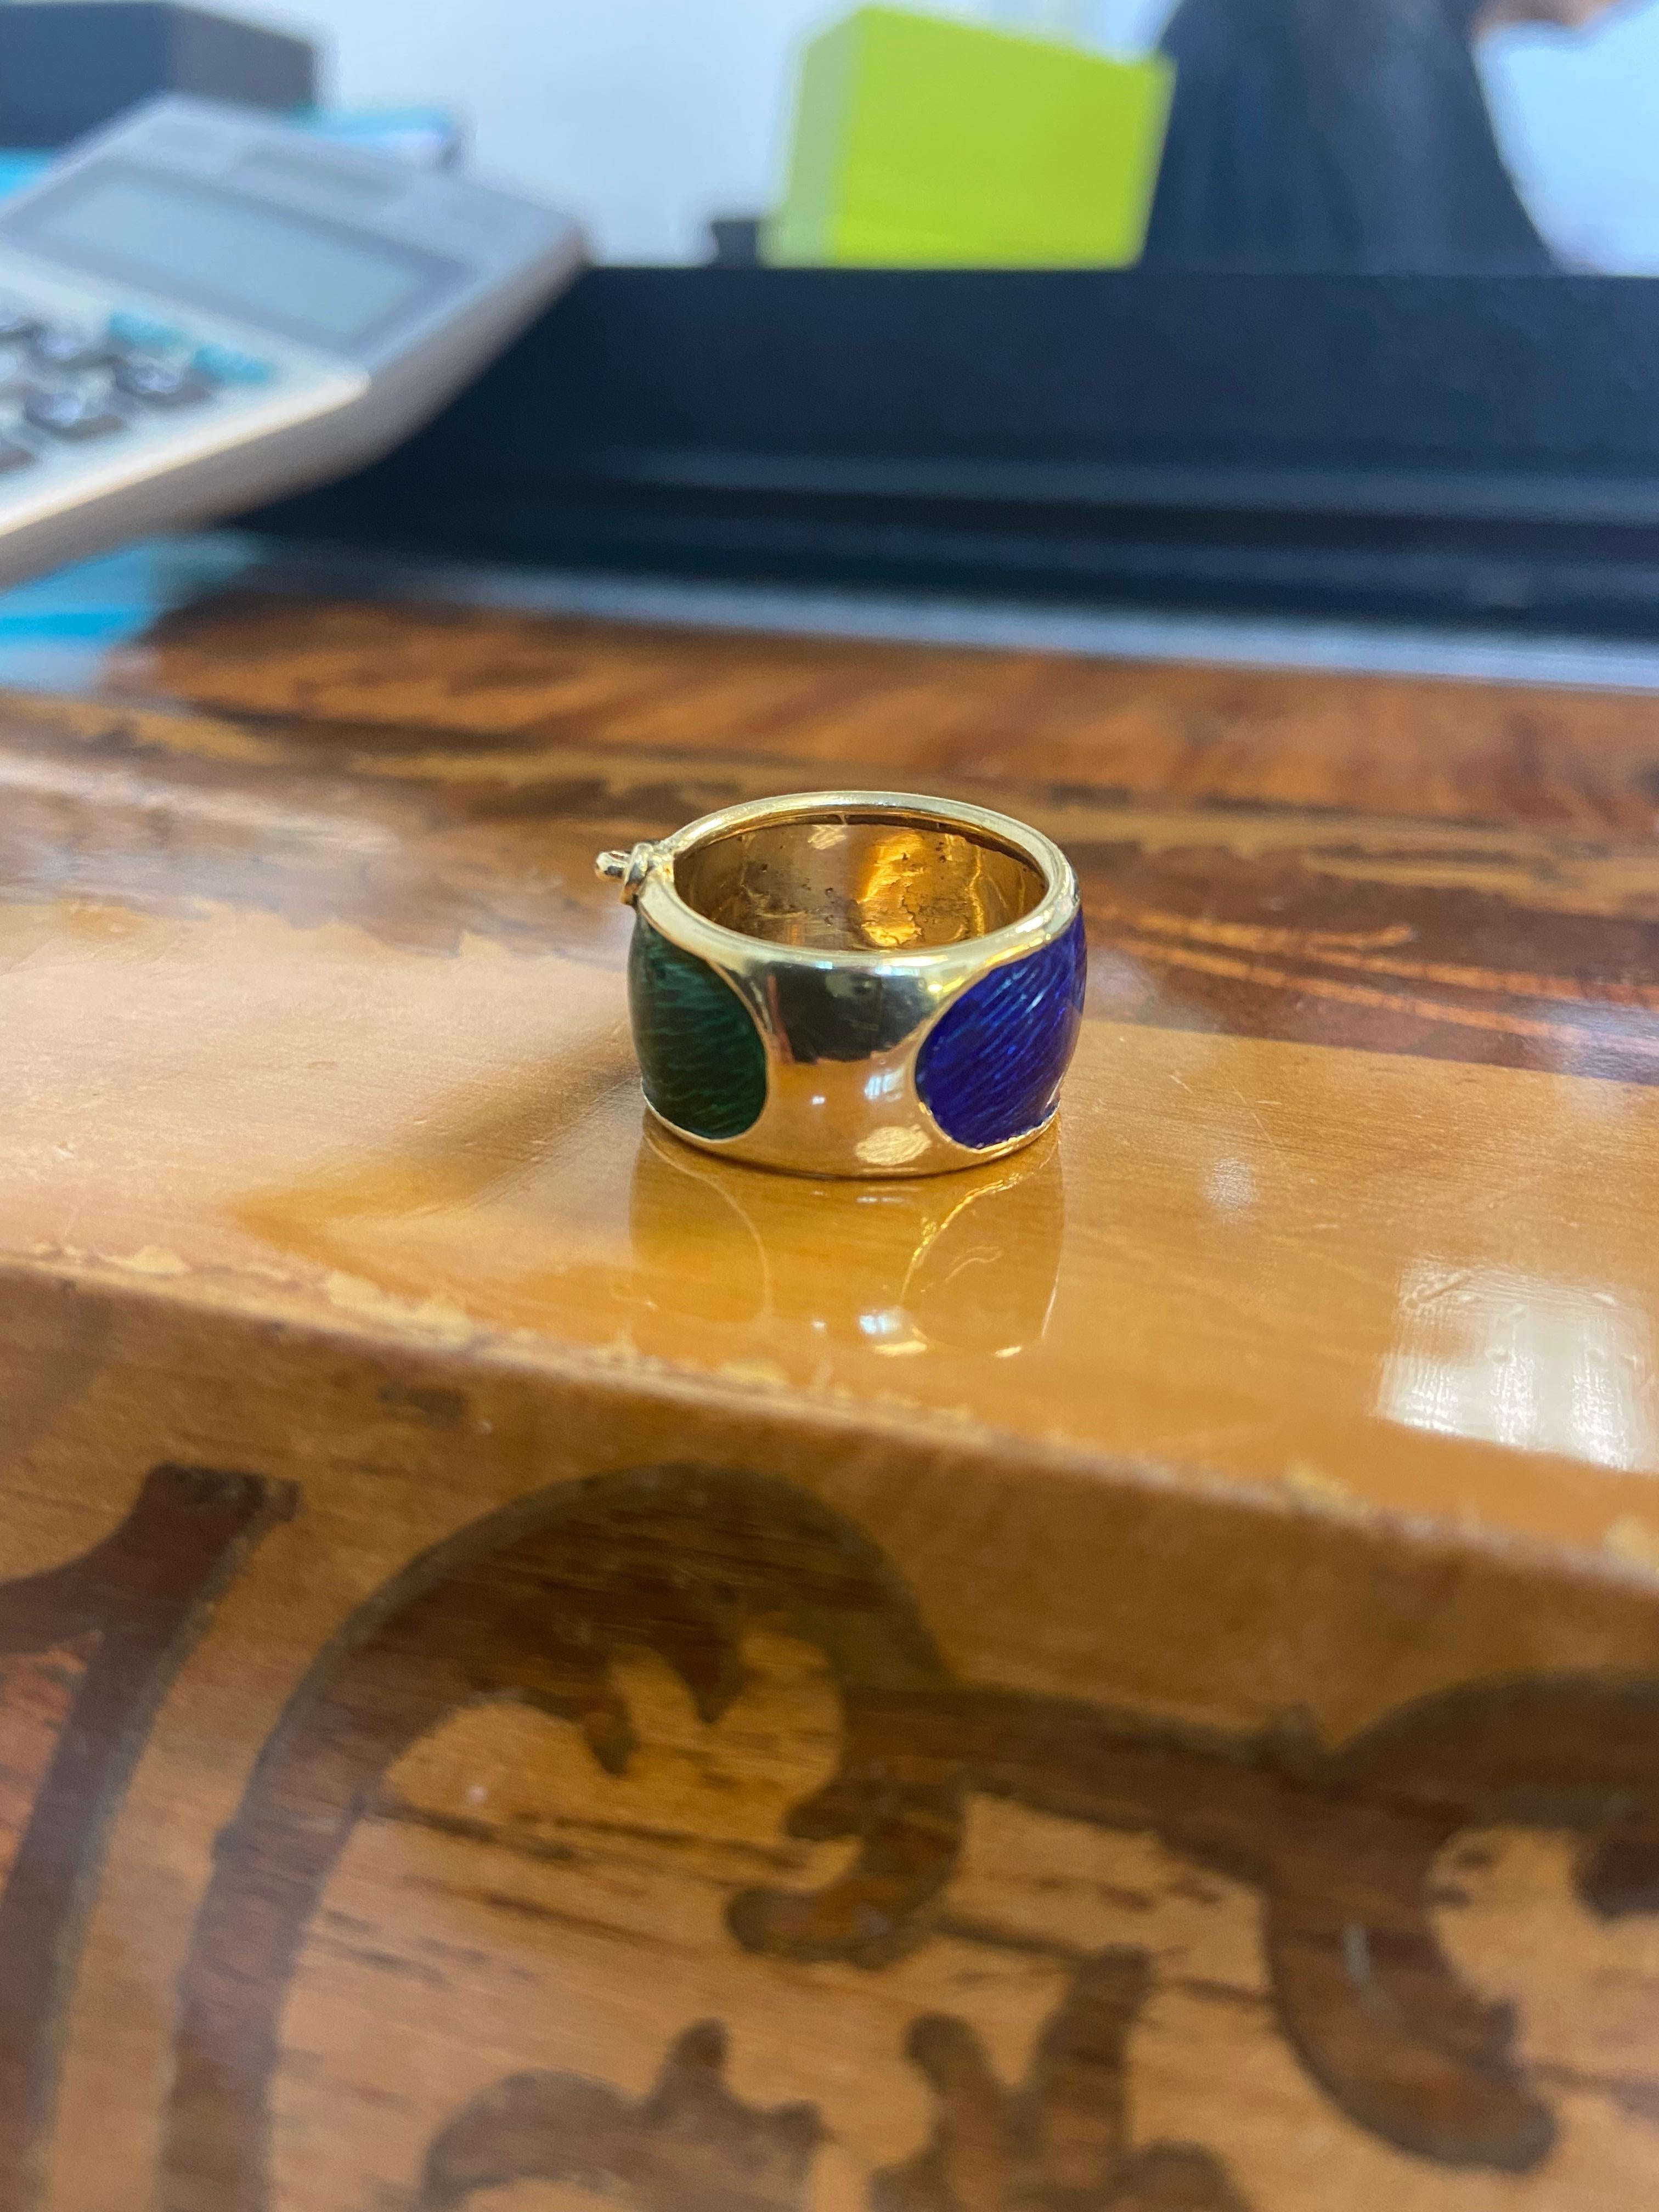 Kutchinsky 18k Yellow Gold, Blue & Green Enamel Zipper Motif Ring Vintage Fully Marked


Here is your chance to purchase a beautiful and highly collectible designer ring.  Truly a great piece at a great price! 

Weight: 11 grams

Dimensions: 1/2